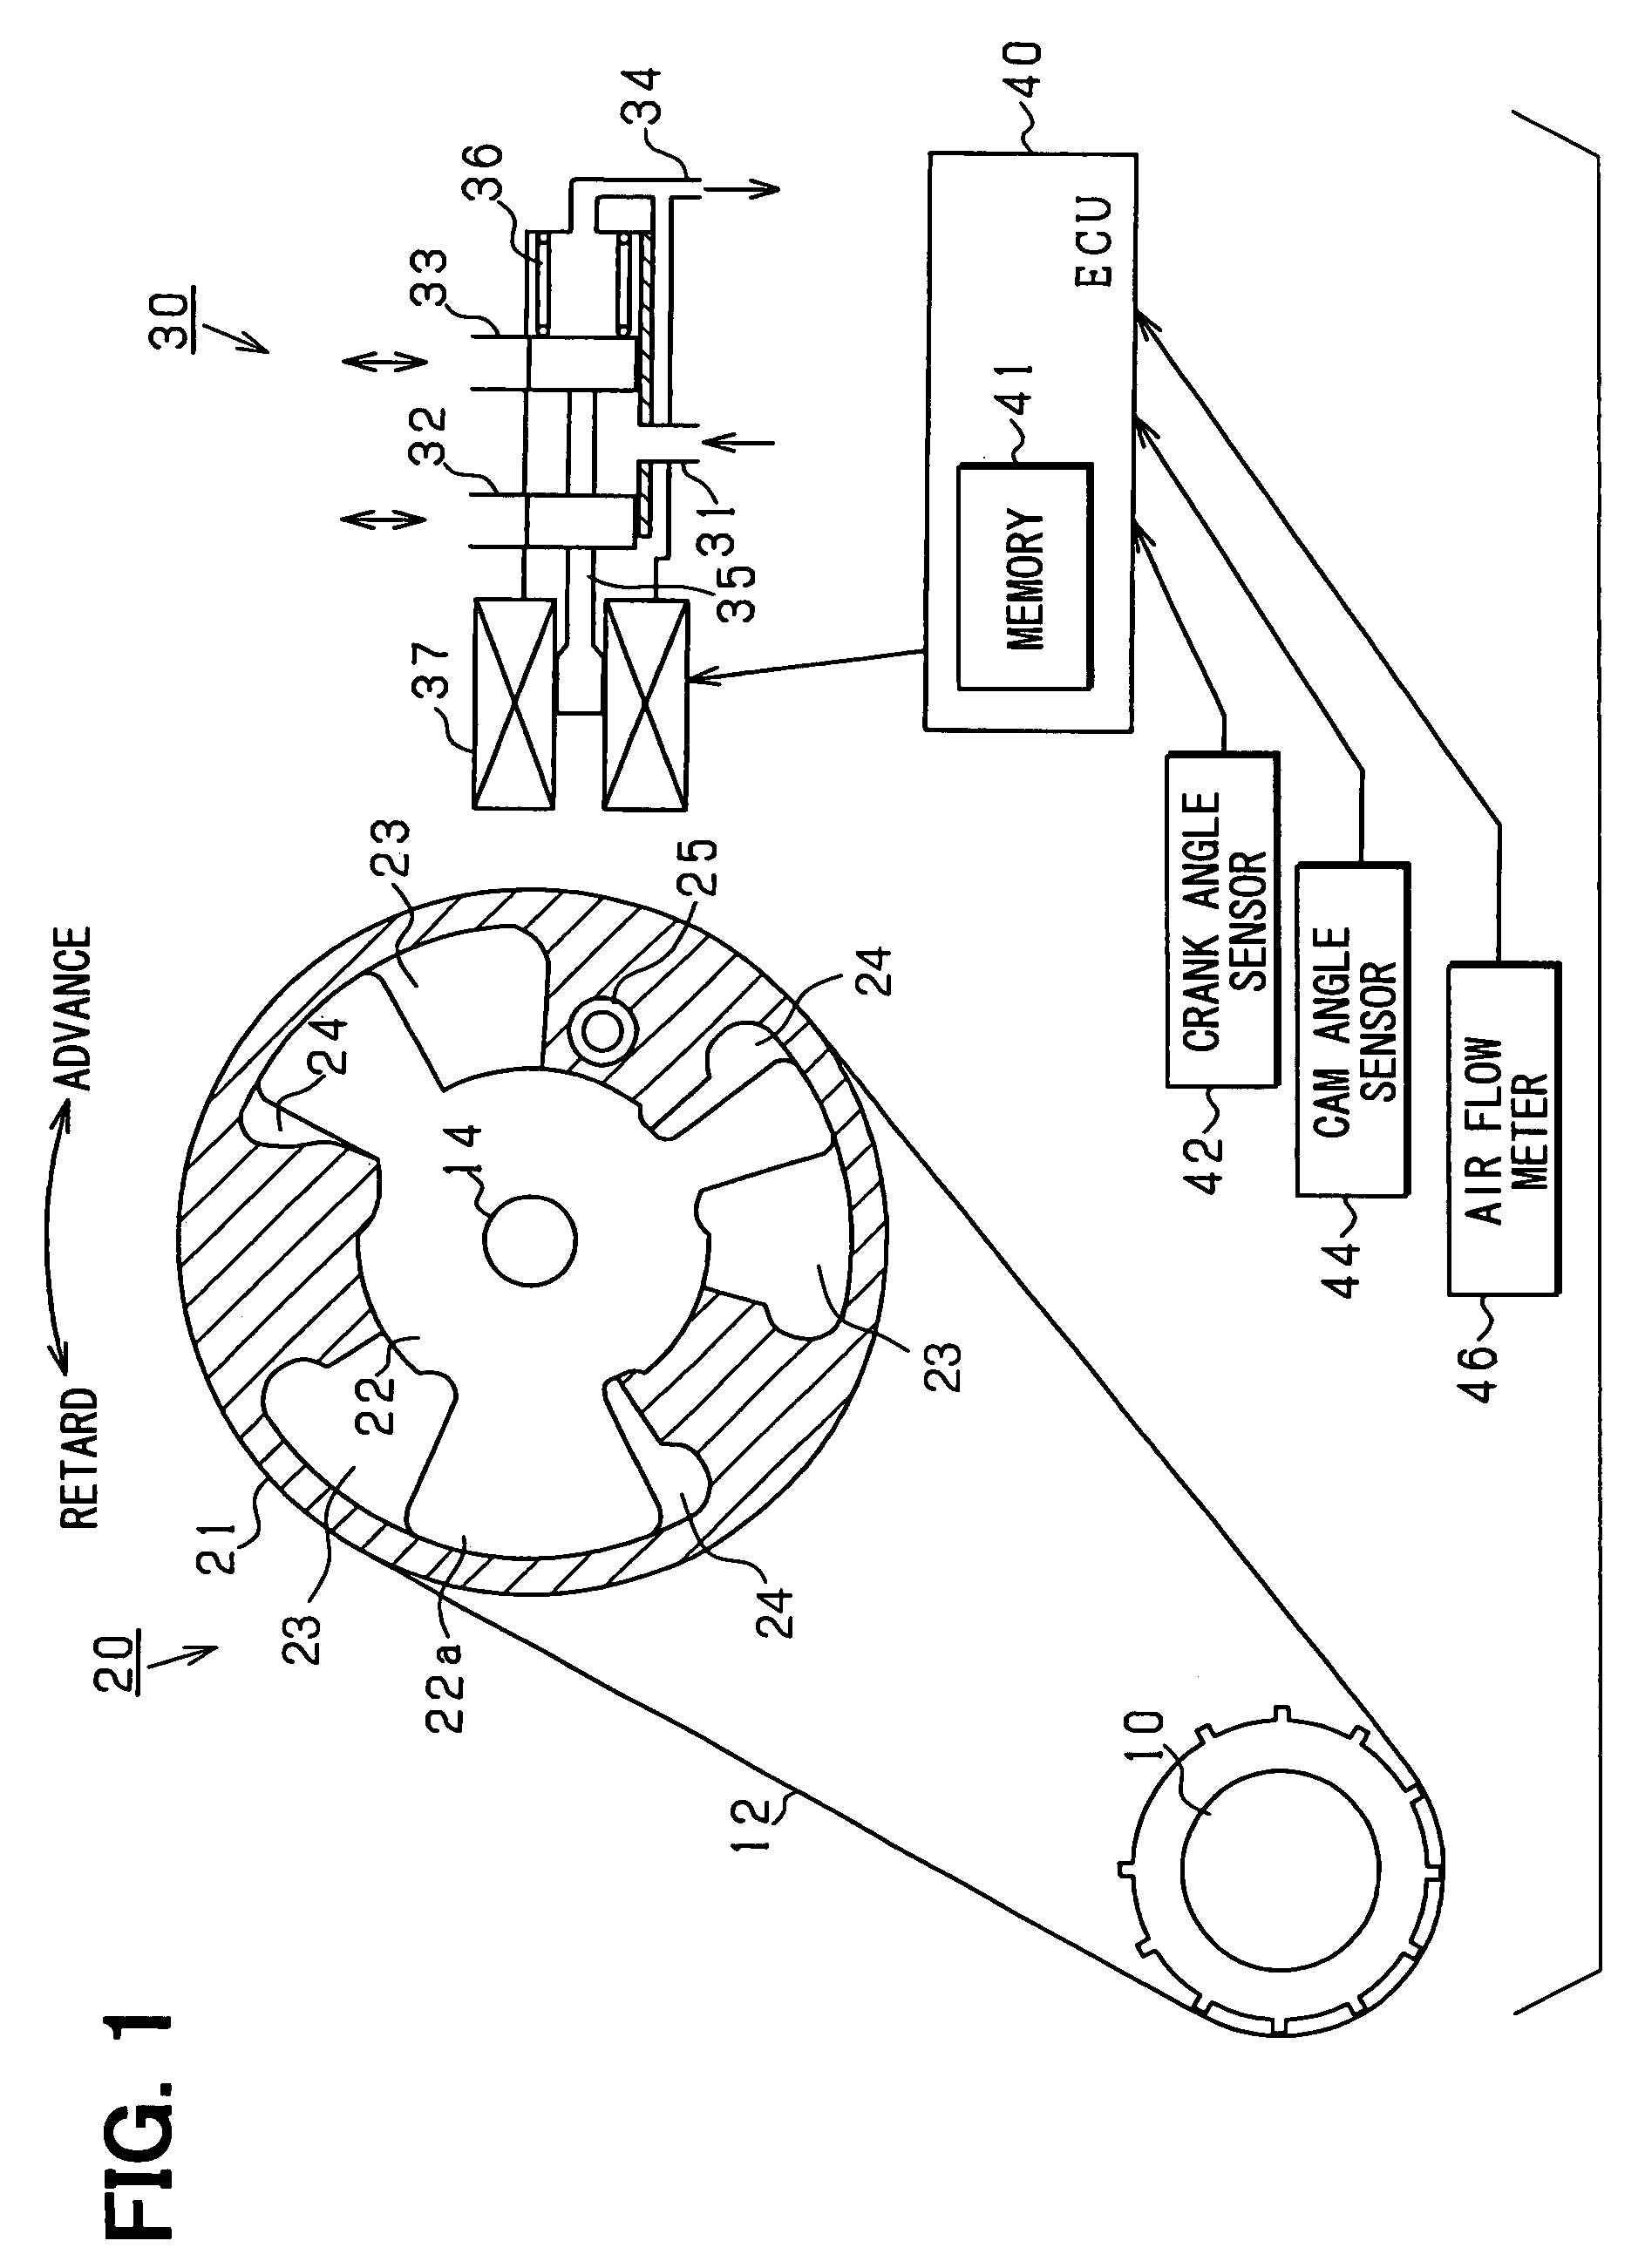 Control device for engine valve and control system for engine